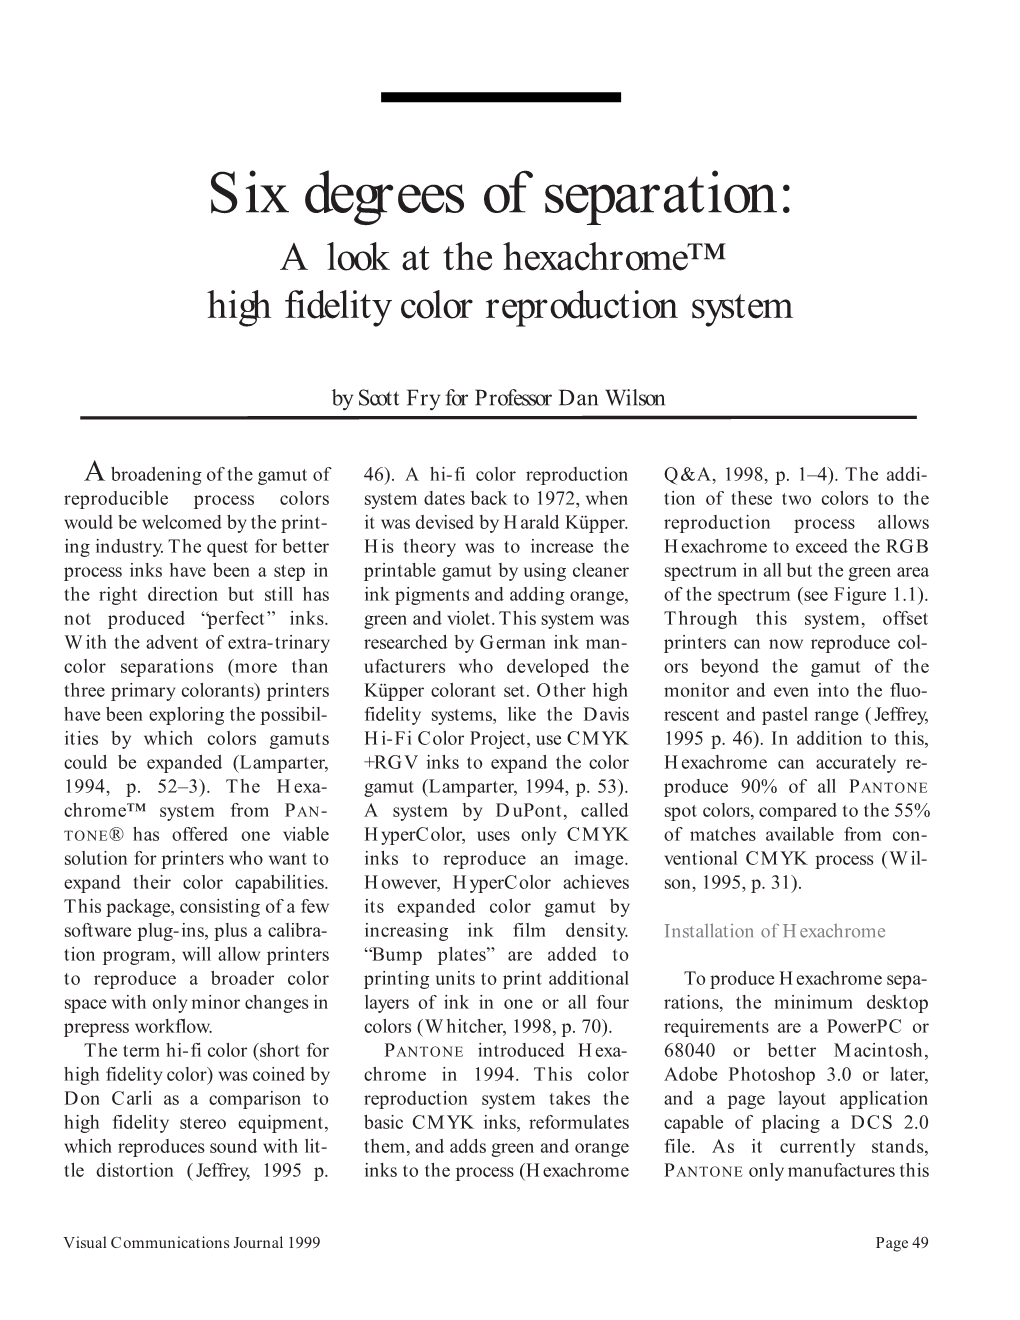 Six Degrees of Separation: a Look at the Hexachrome™ High Fidelity Color Reproduction System